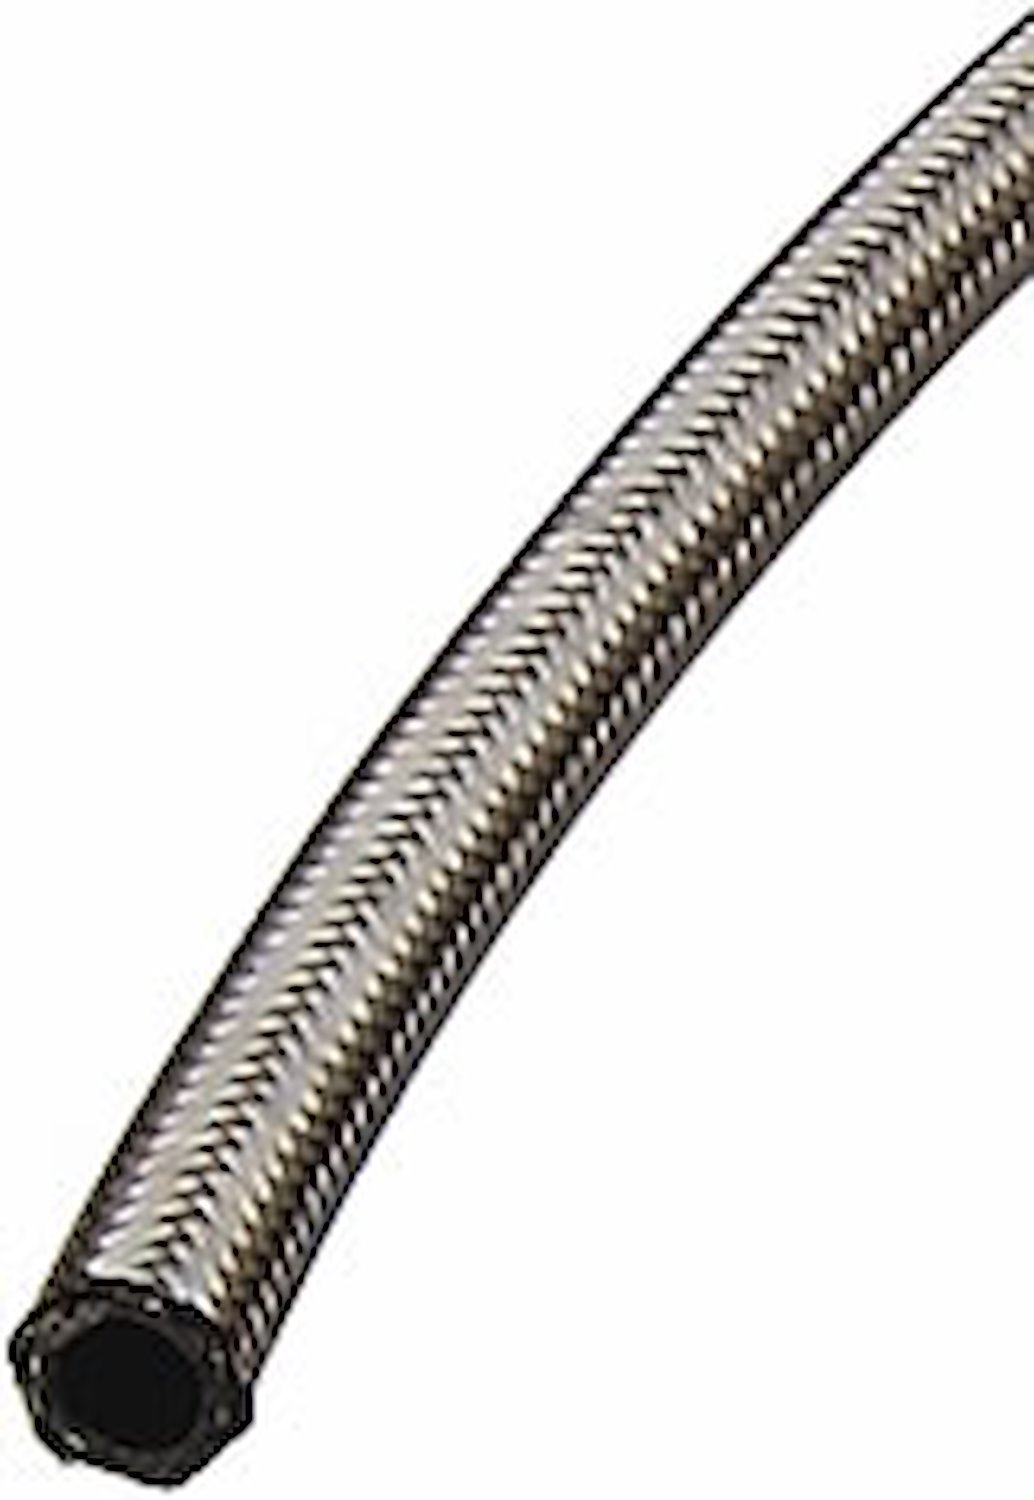 Pro-Flo 200 Series Stainless Steel Braided Hose -8